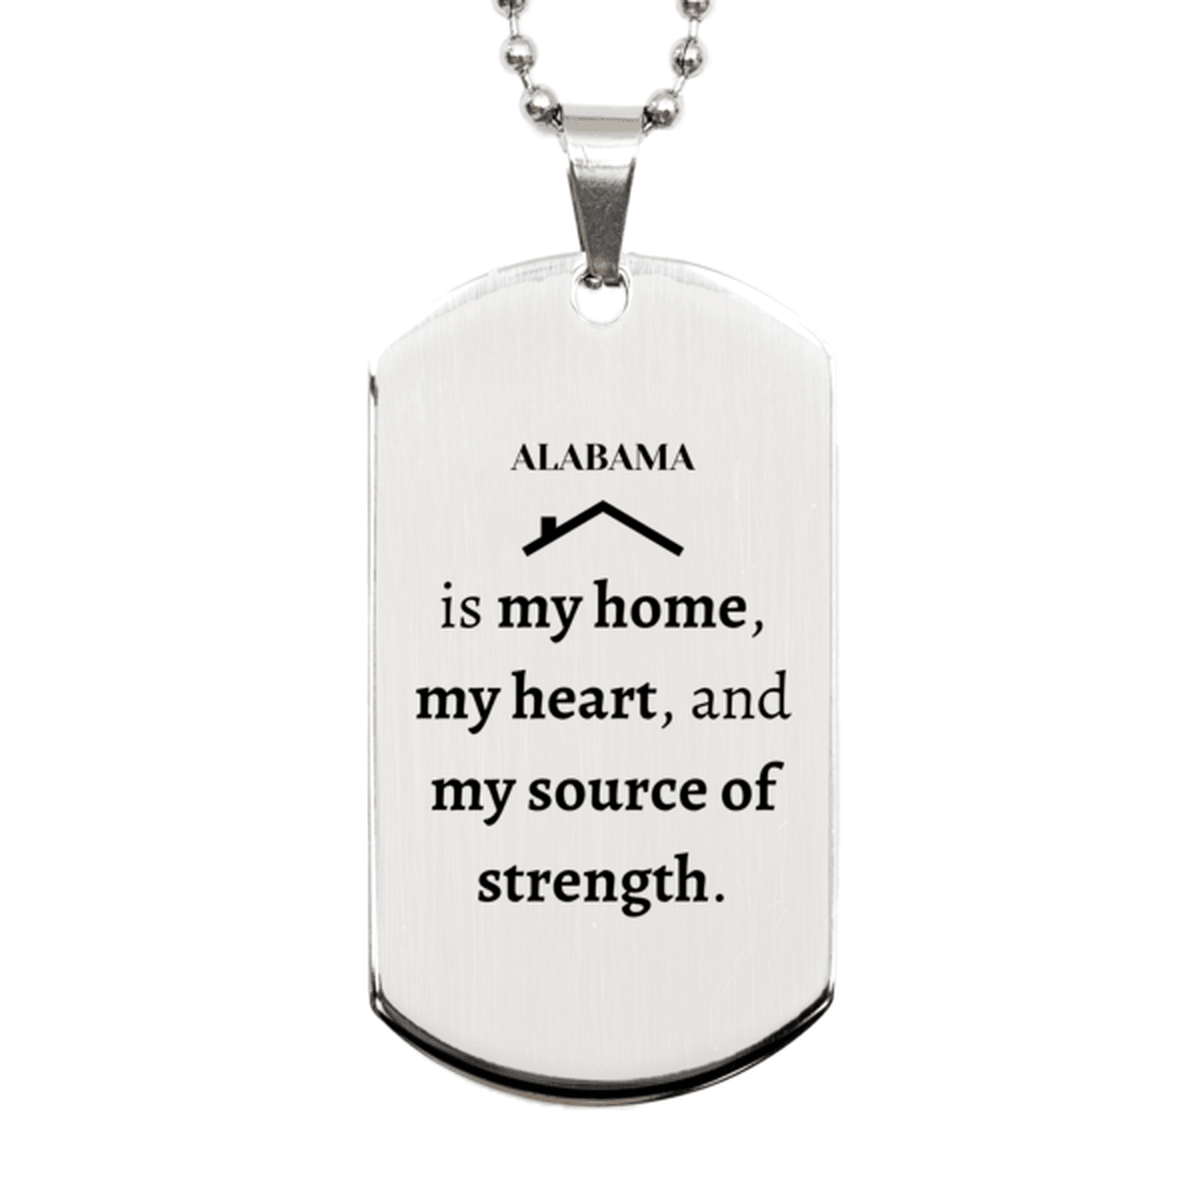 Alabama is my home Gifts, Lovely Alabama Birthday Christmas Silver Dog Tag For People from Alabama, Men, Women, Friends - Mallard Moon Gift Shop